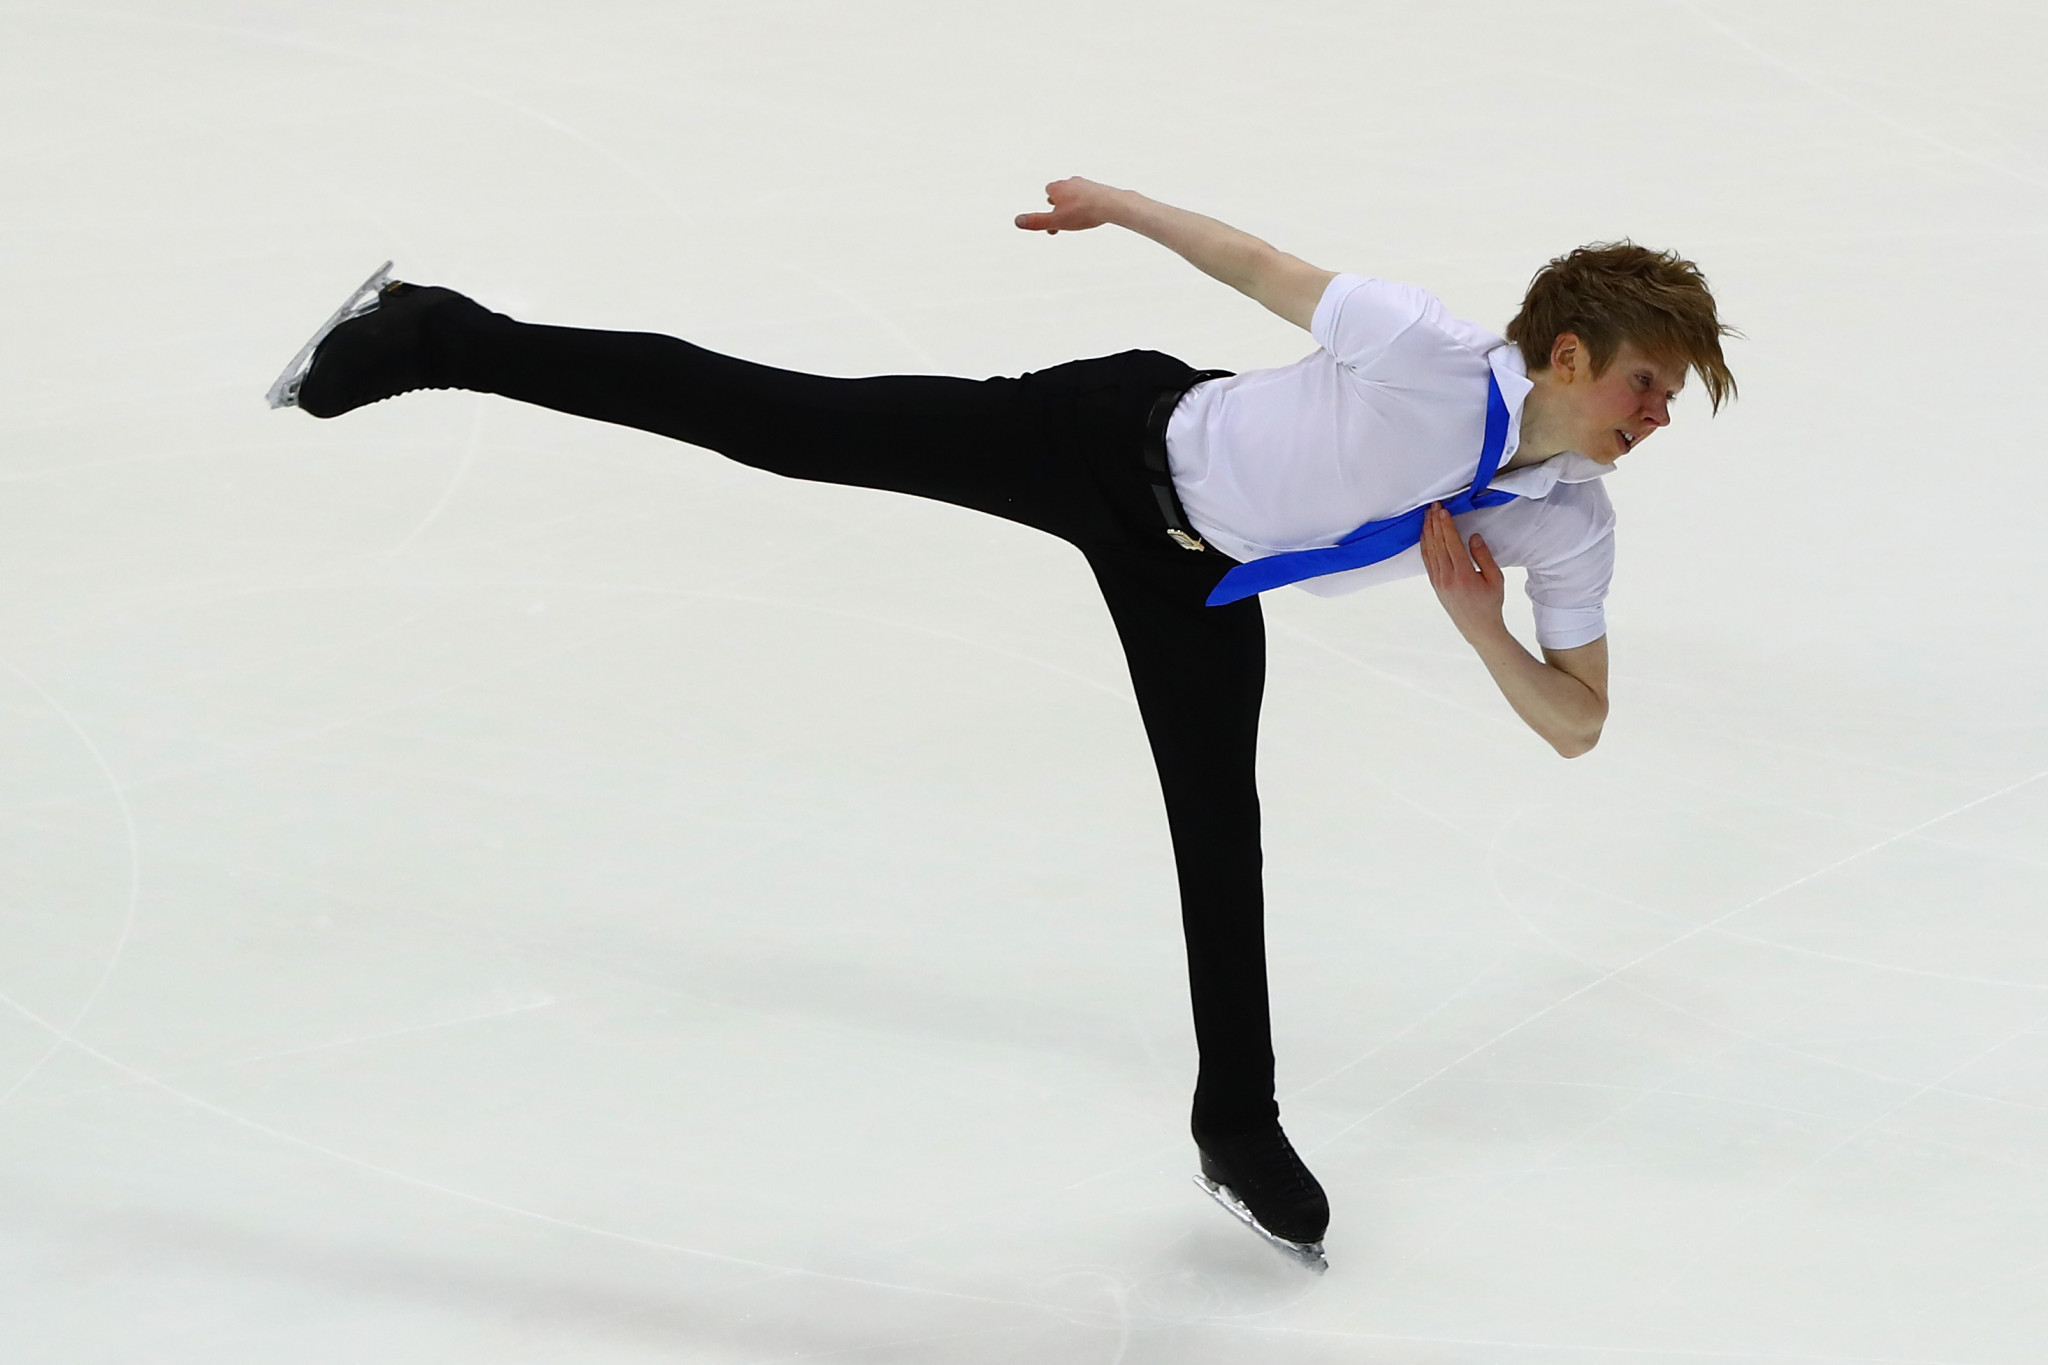 Olympic silver medallist Kevin Reynolds has been appointed as athlete ambassador for this year's Skate Canada International ©Getty Images